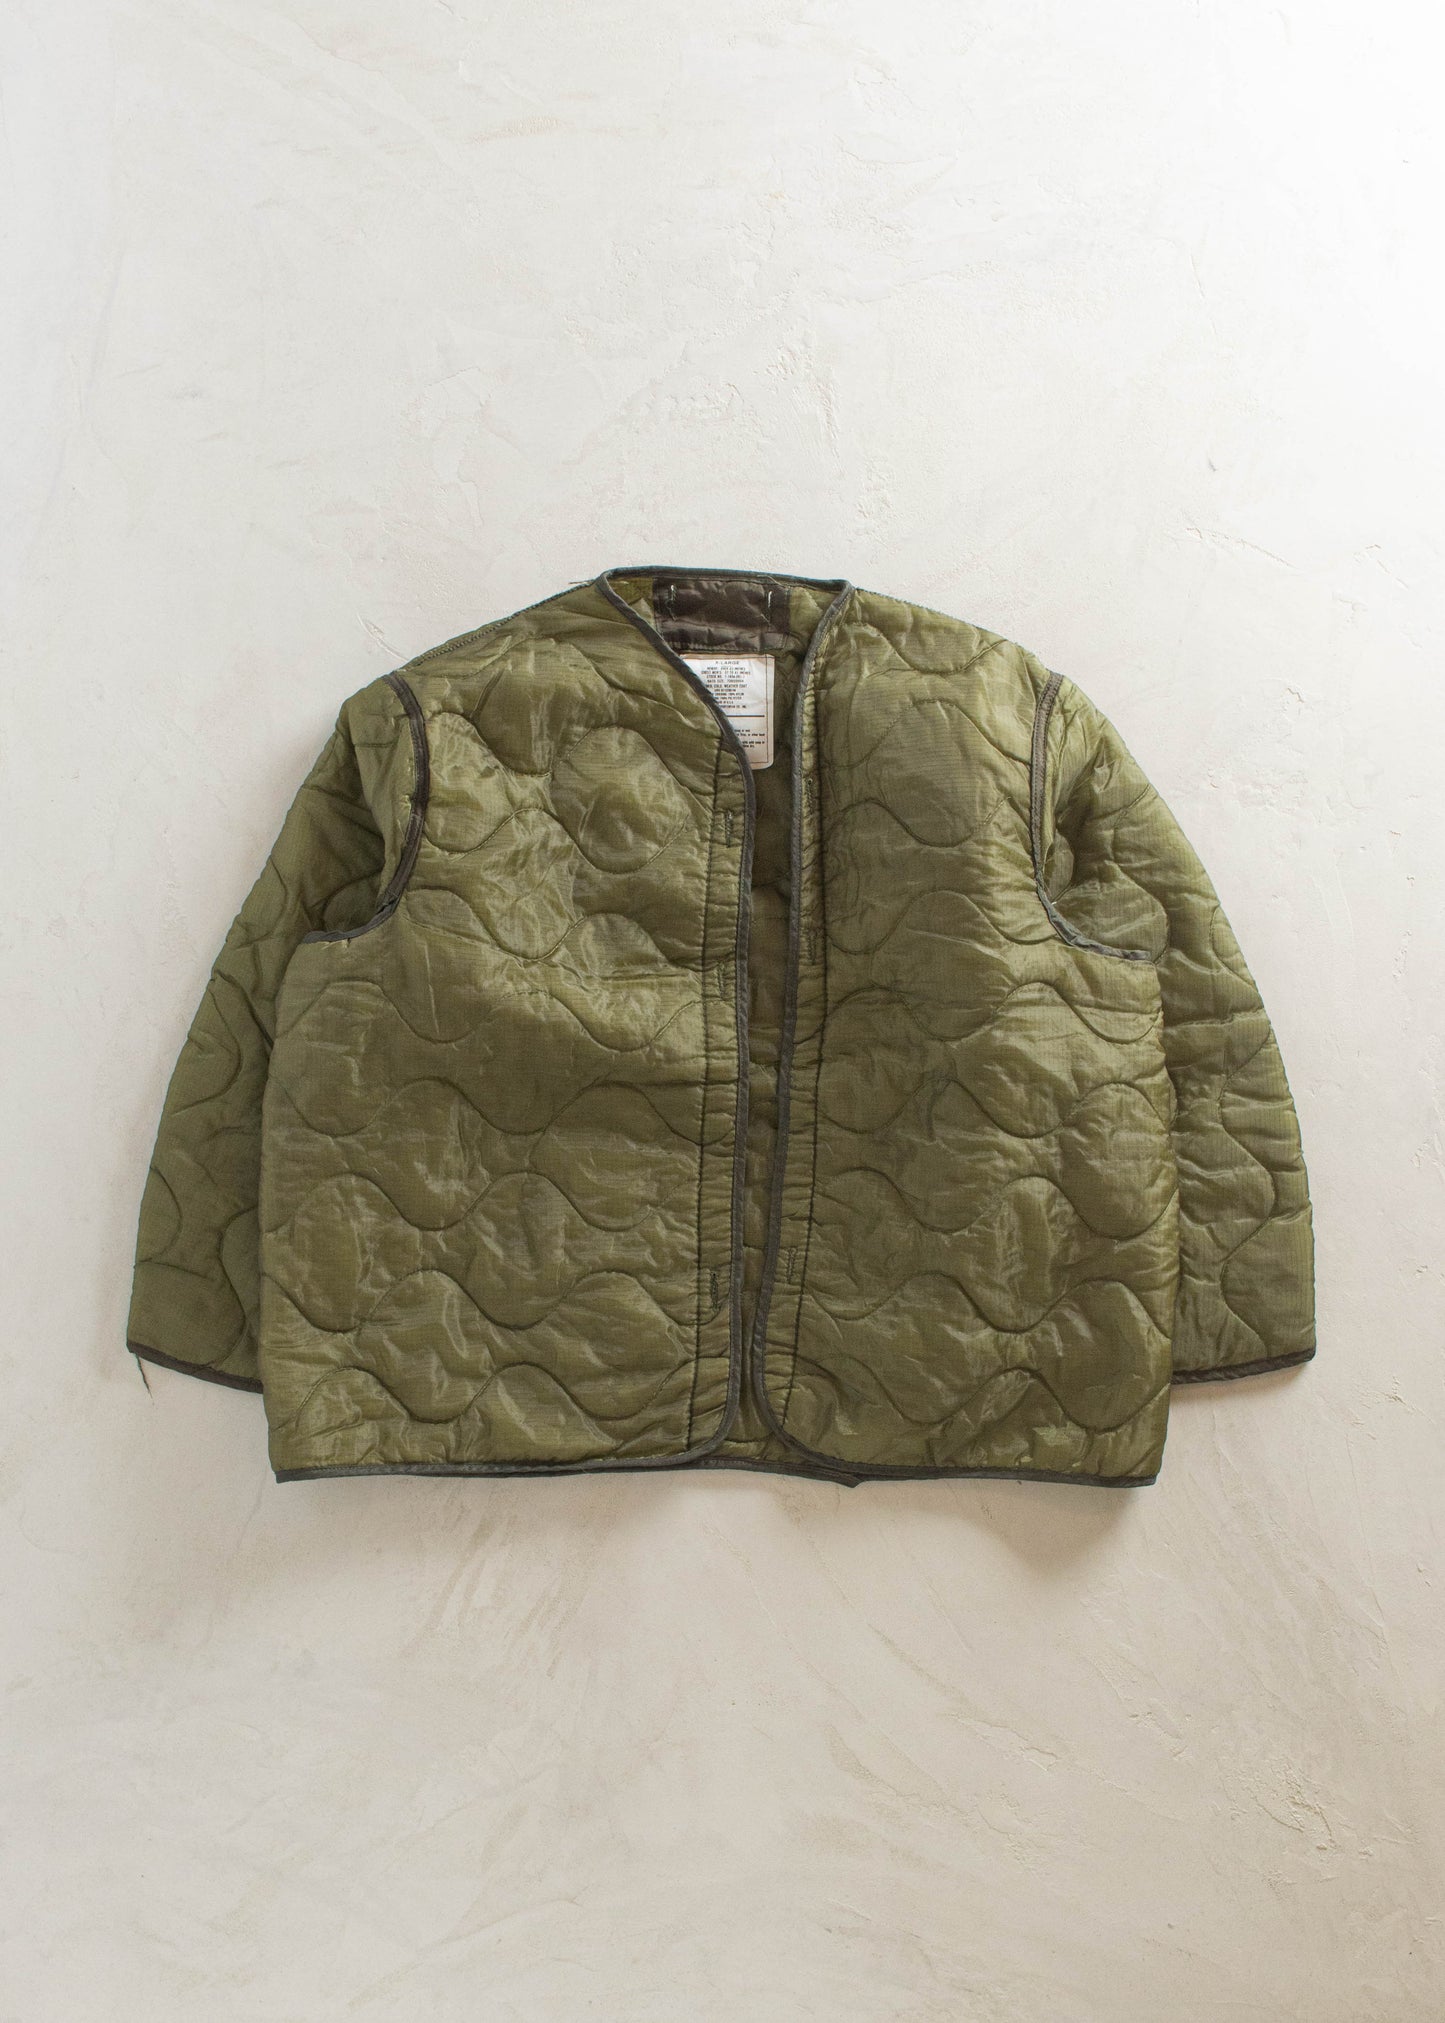 1980s Military M-65 Quilted Liner Jacket Size XL/2XL